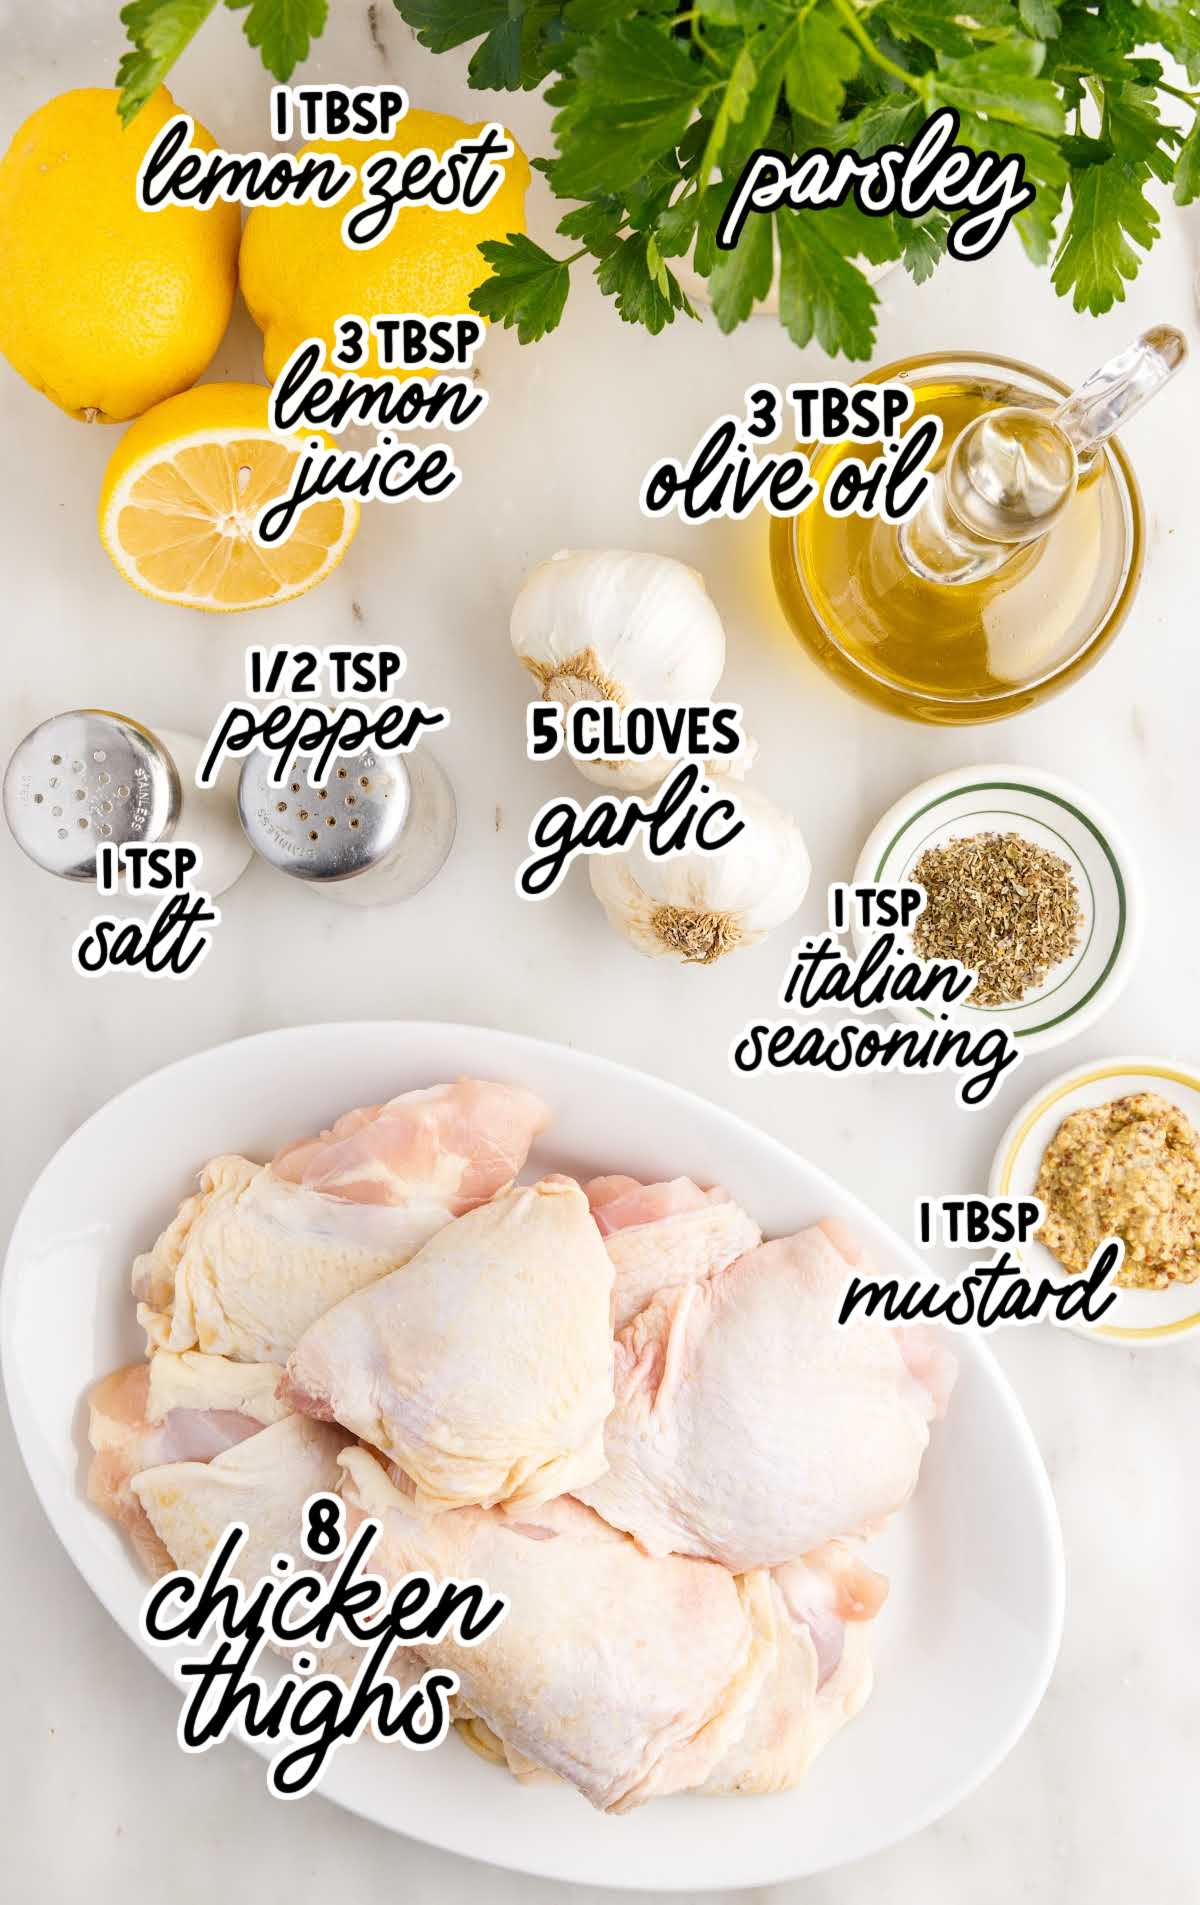 Baked Chicken Thighs raw ingredients that are labeled